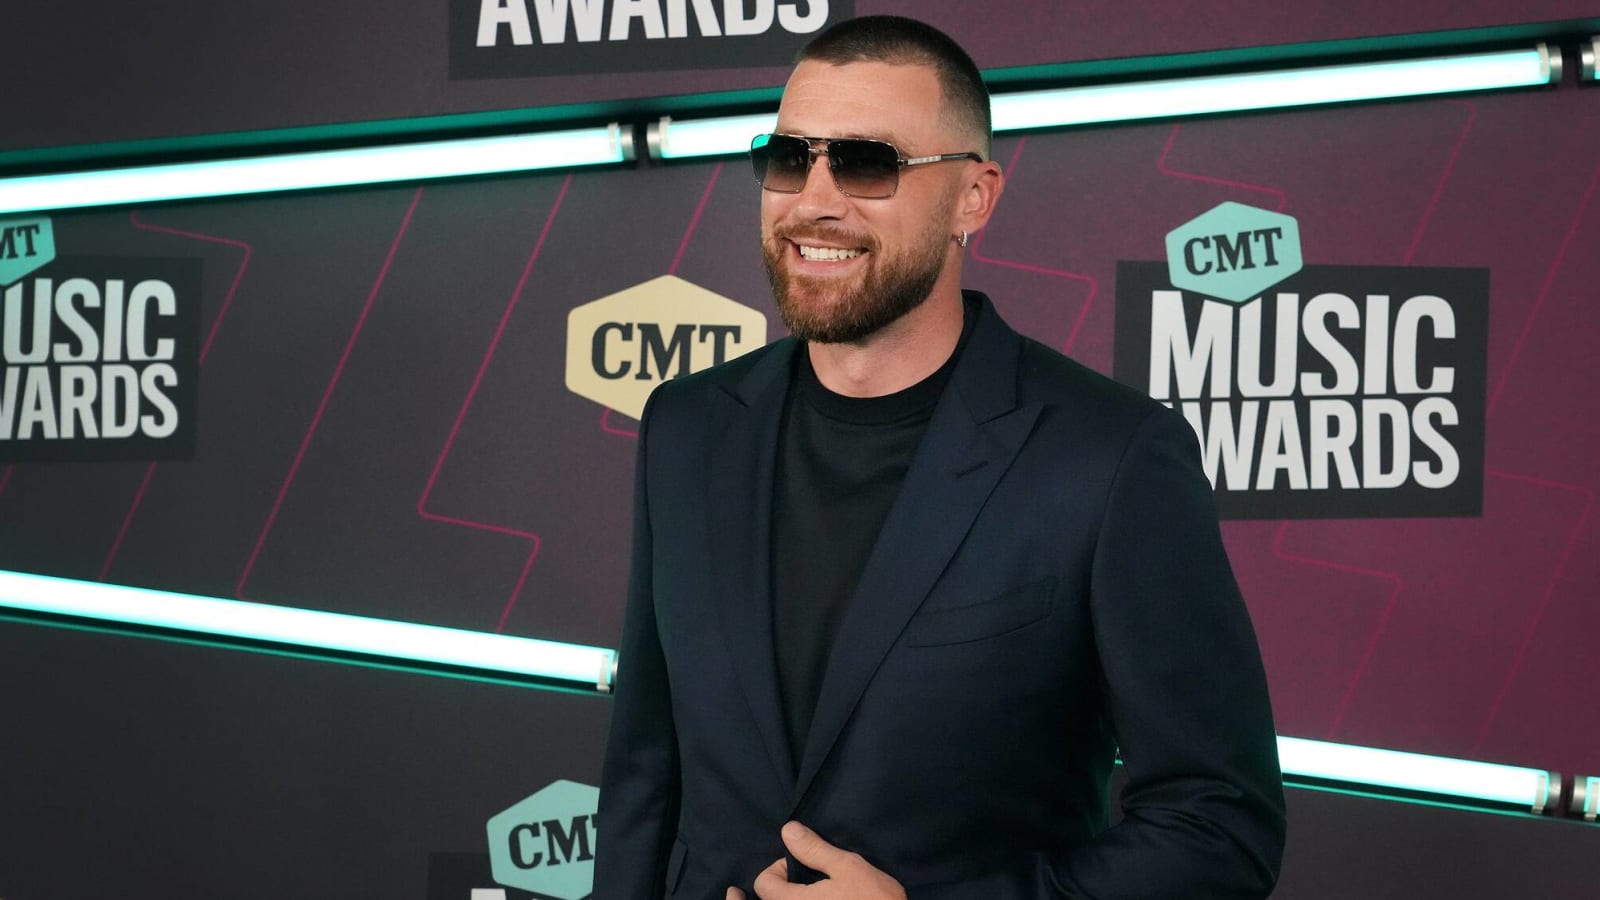 Travis Kelce, who recently signed a $34.25 million deal with the Chiefs, marginally loses out on $100,000 following photo finish at Kentucky Derby